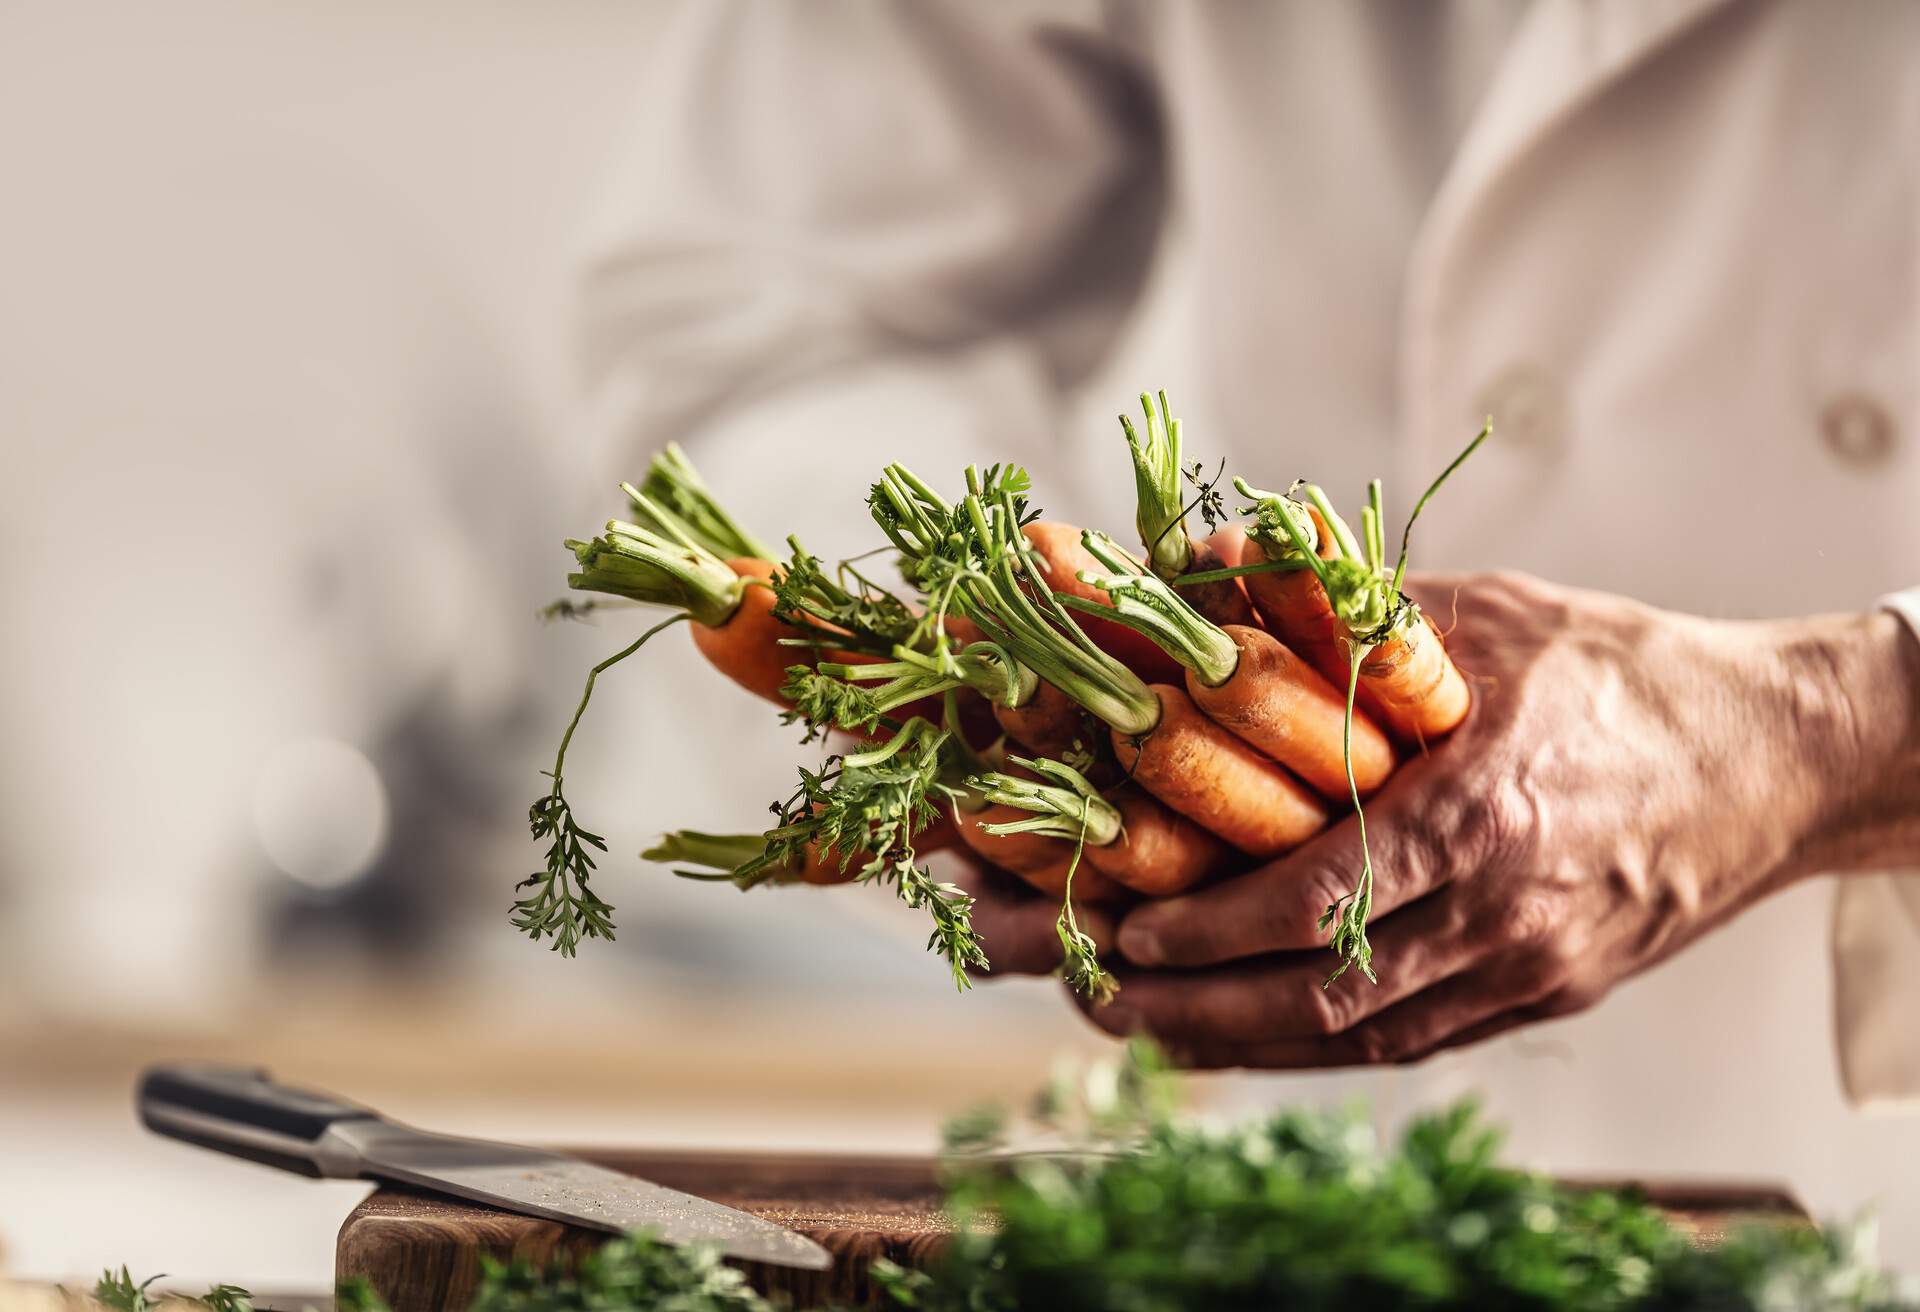 Chef in a restaurant kitchen holding a fresh carrot in his hands.